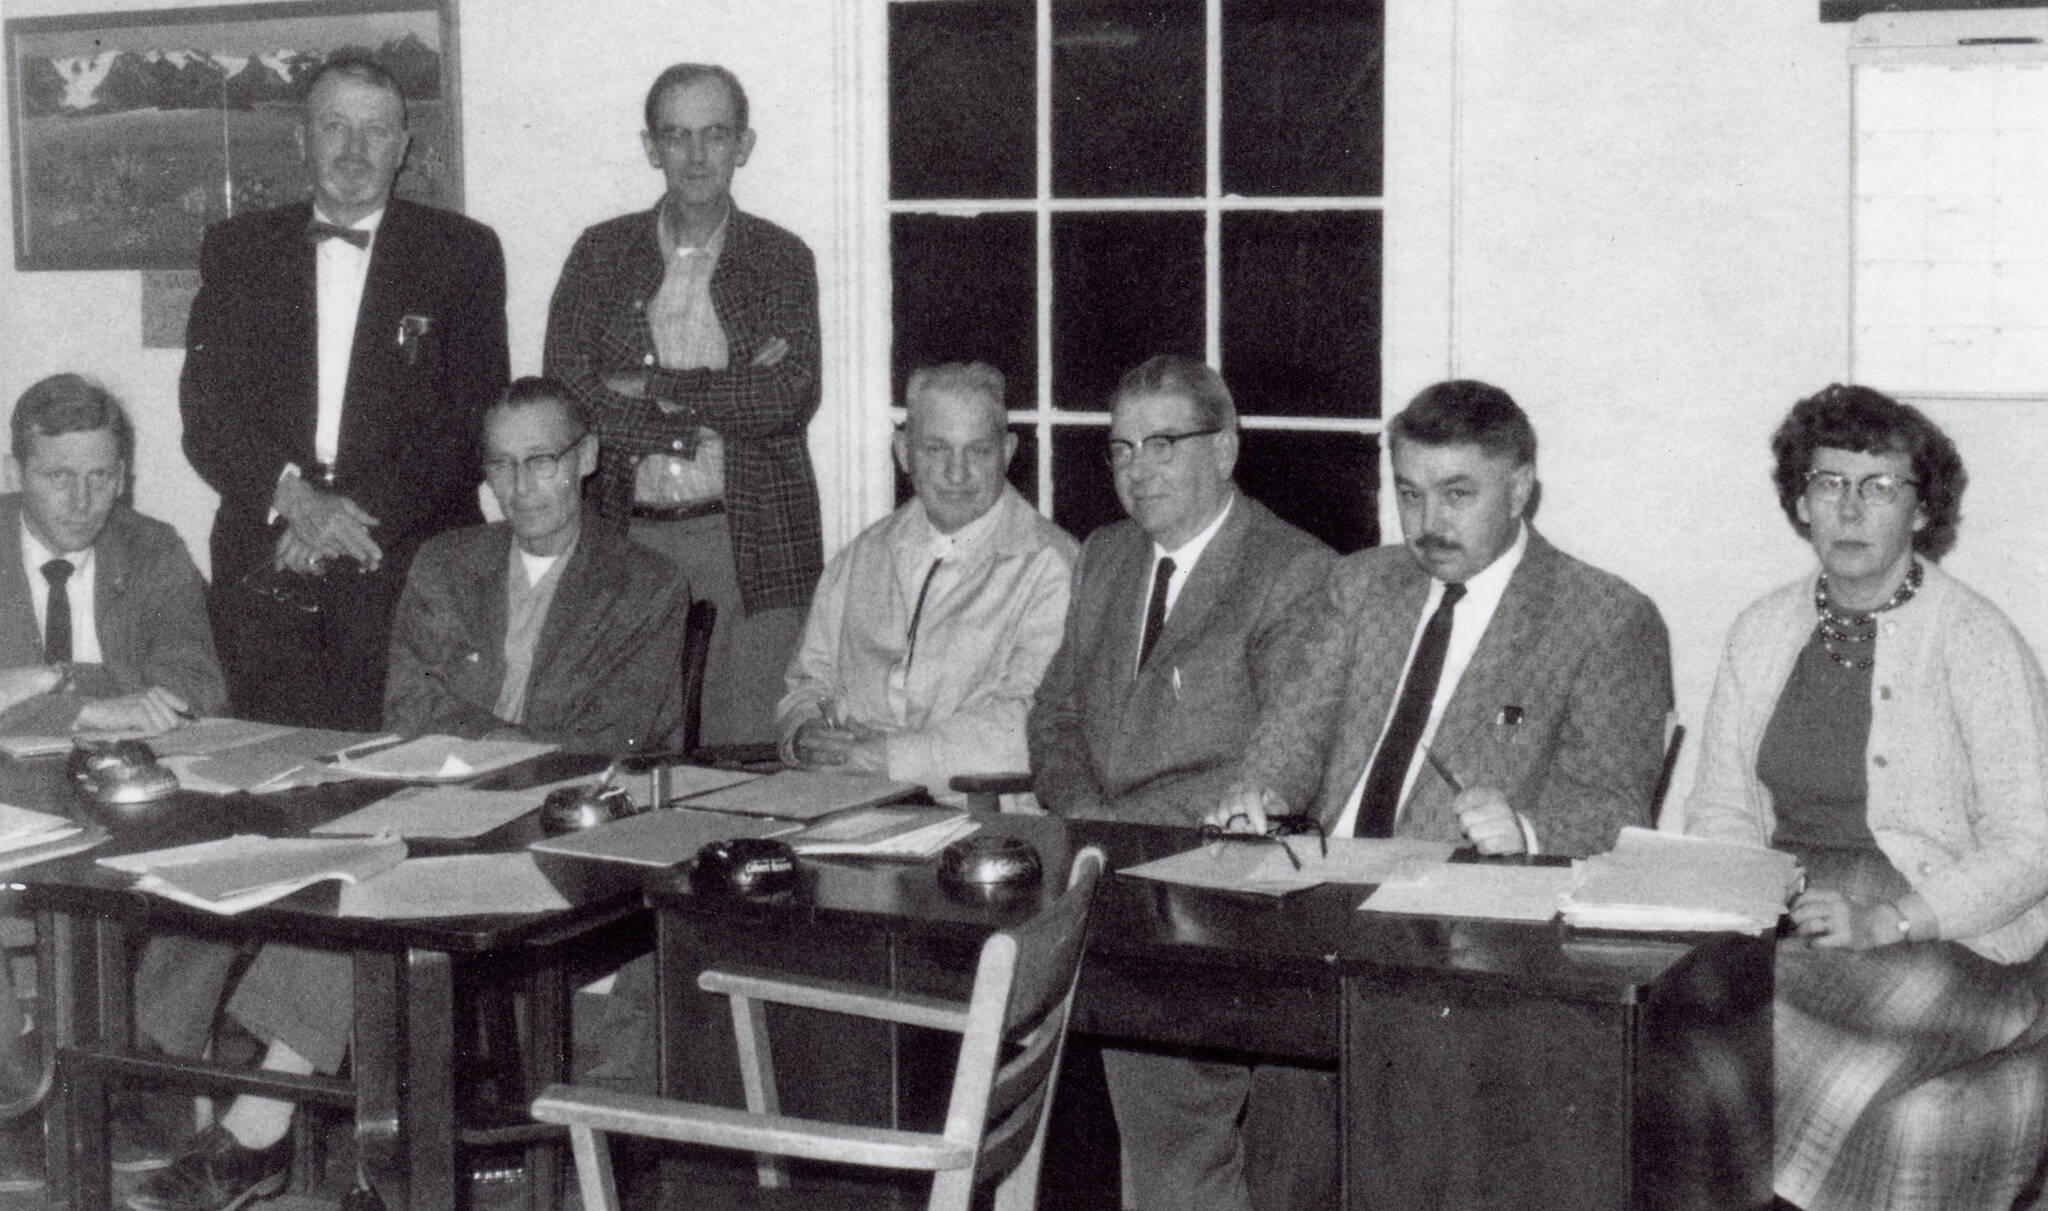 John Fenger (far left) served on Homer’s first city council, formed after Homer incorporated in 1964. (Photo courtesy of the Fenger Family Collection)